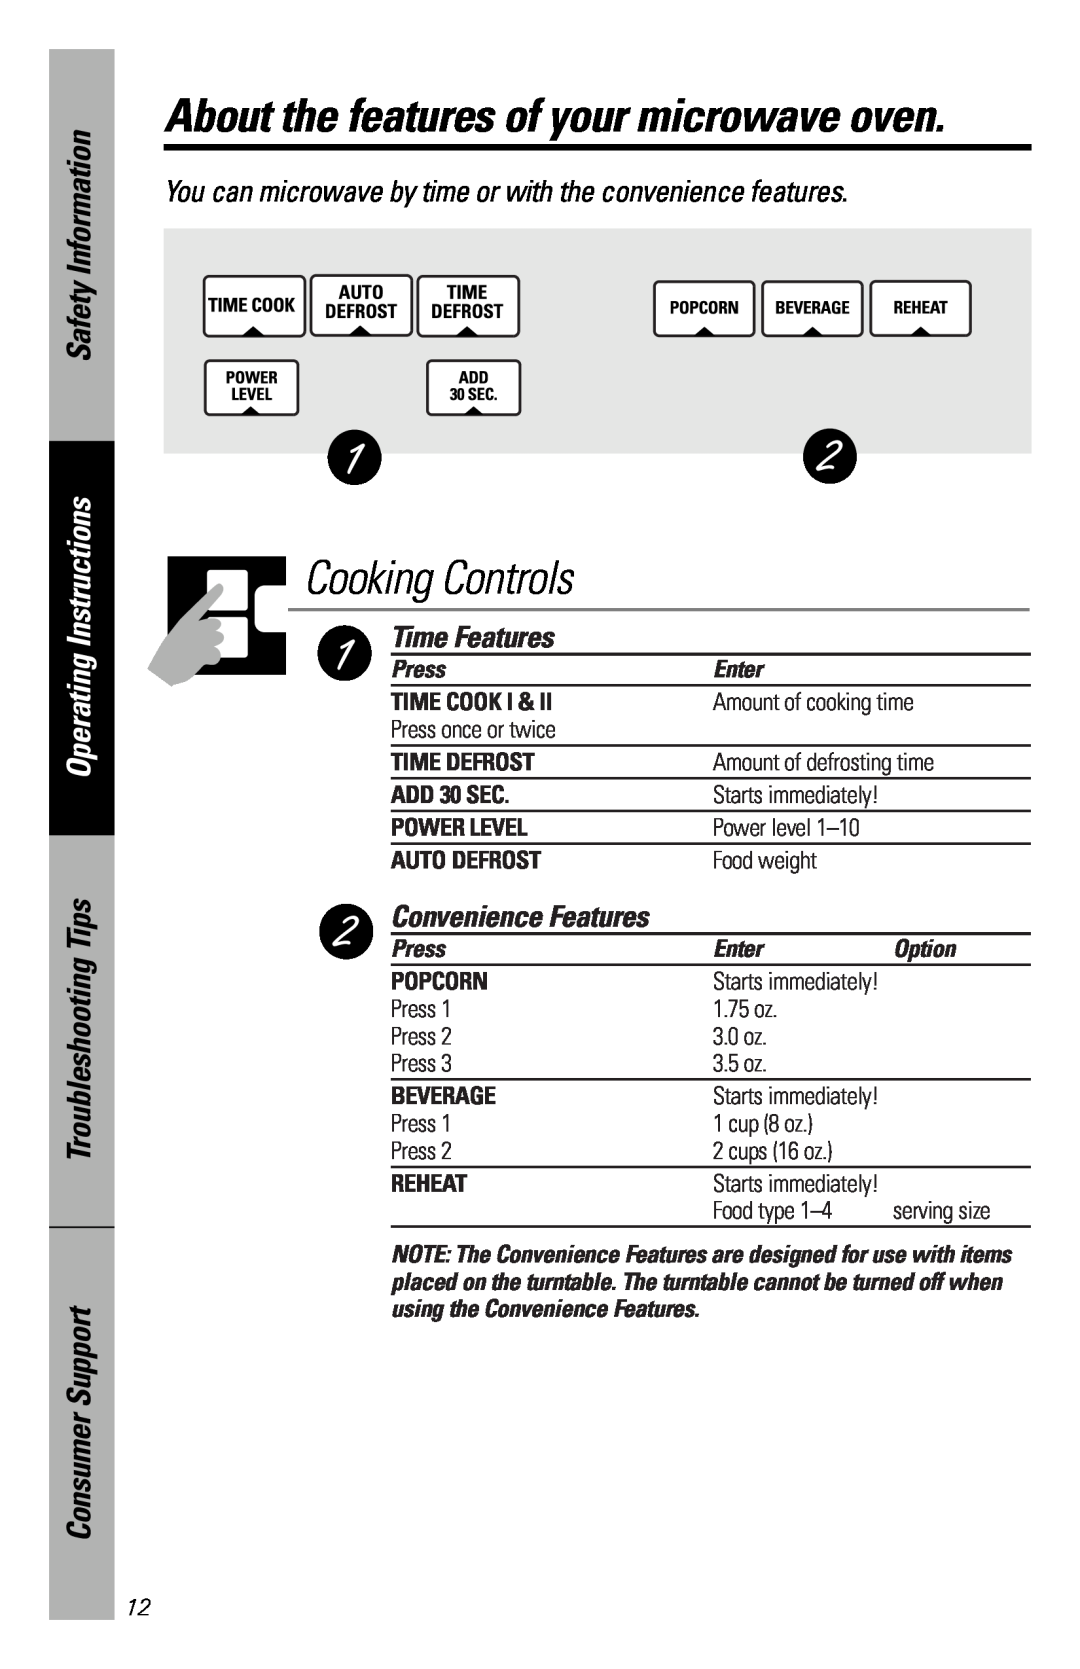 GE JVM1533 Cooking Controls, About the features of your microwave oven, Troubleshooting Tips Consumer Support, Press 